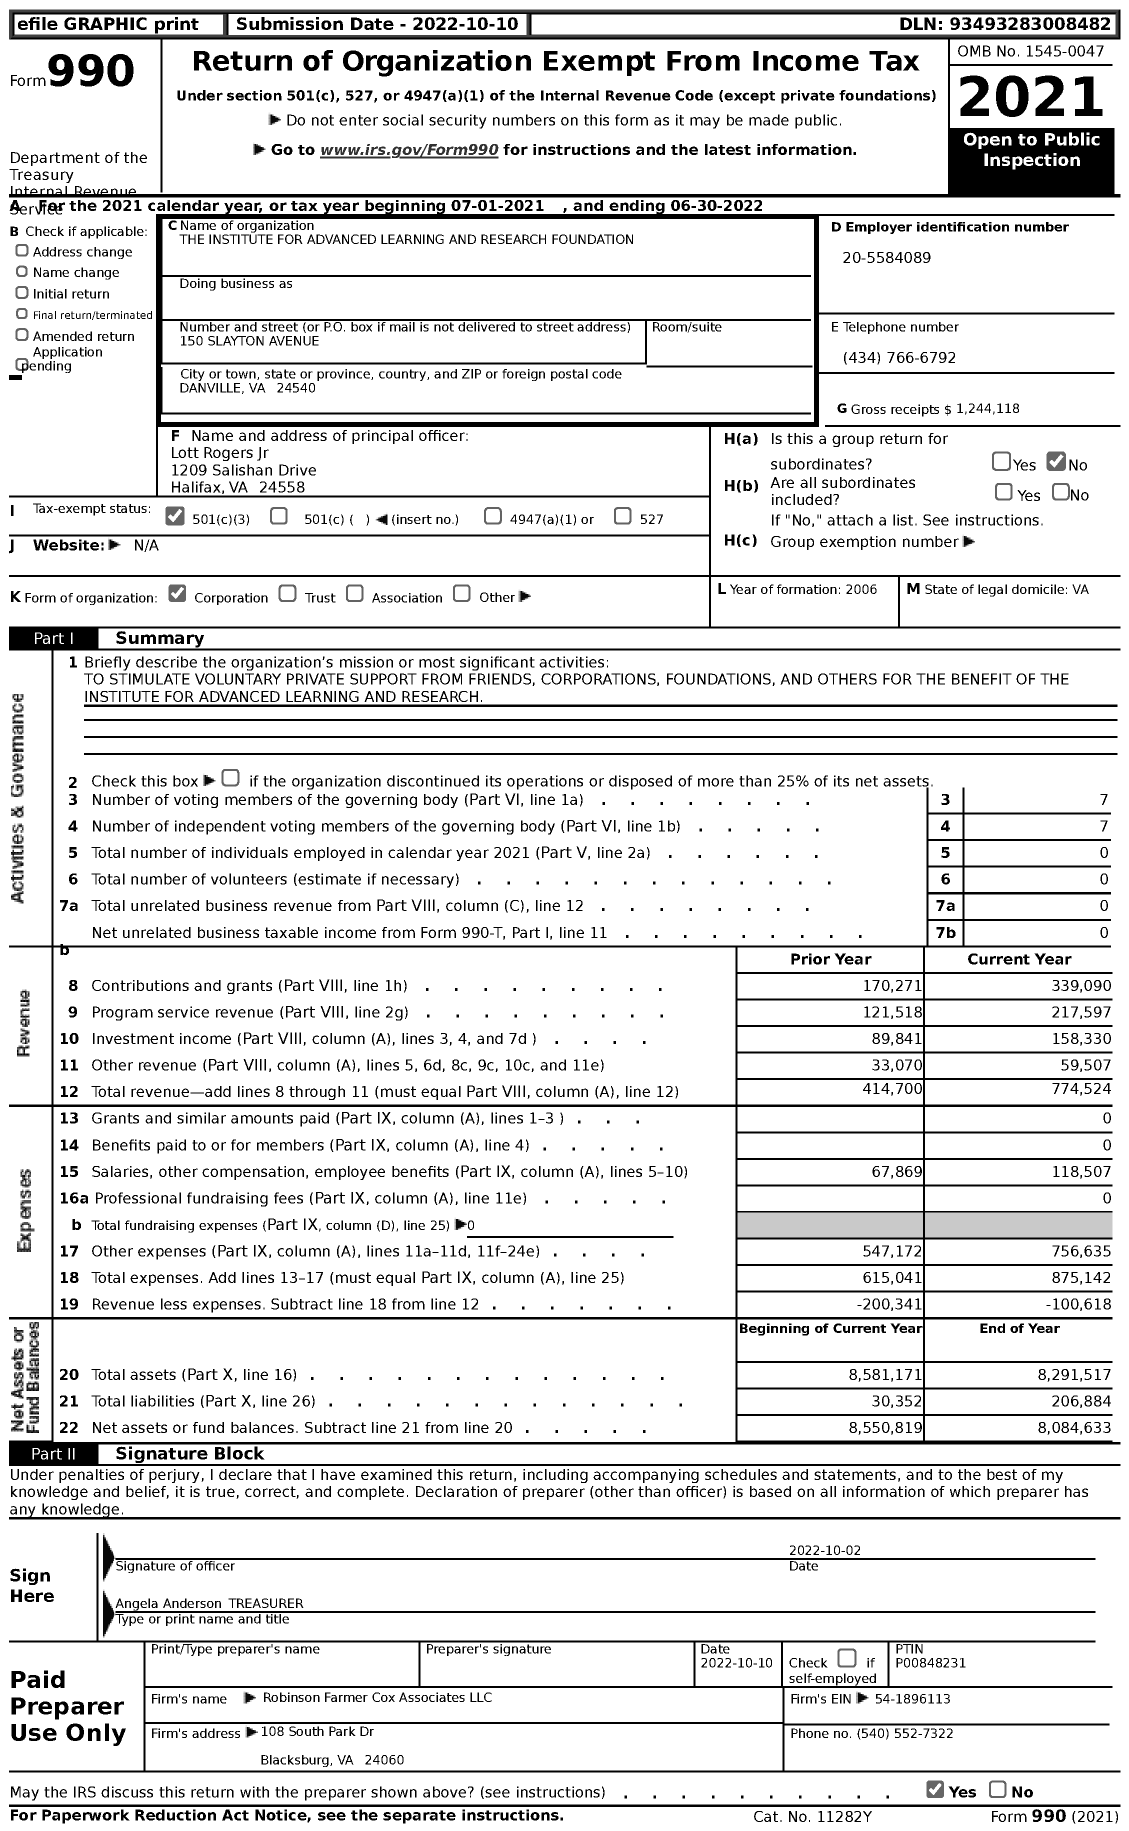 Image of first page of 2021 Form 990 for The Institute for Advanced Learning and Research Foundation